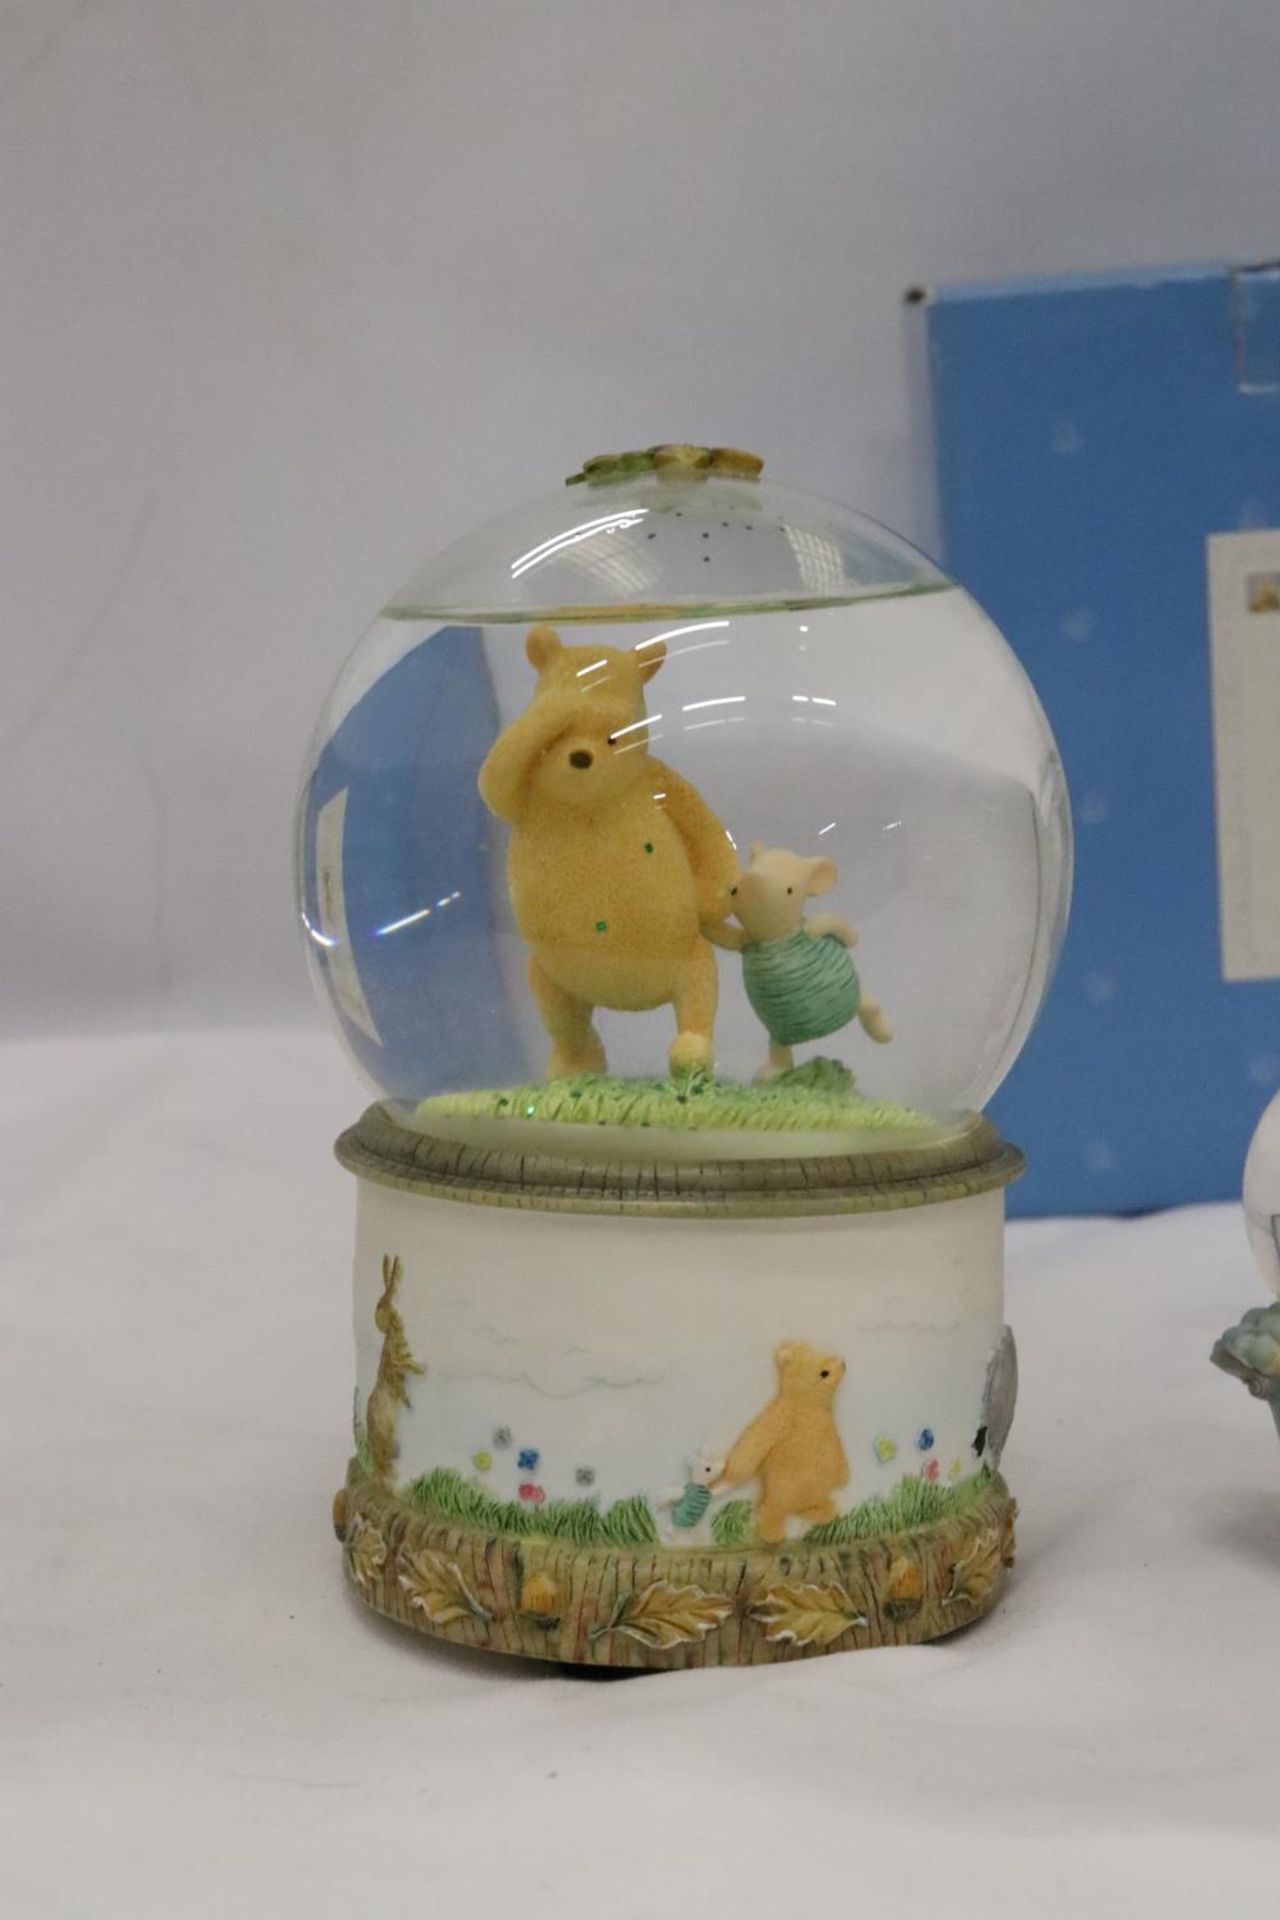 TWO BORDER FINE ARTS WINNIE THE POOH WATERBALLS, A LARGE WINNIE THE POOH AND PIGLET AND A SMALL - Image 2 of 4